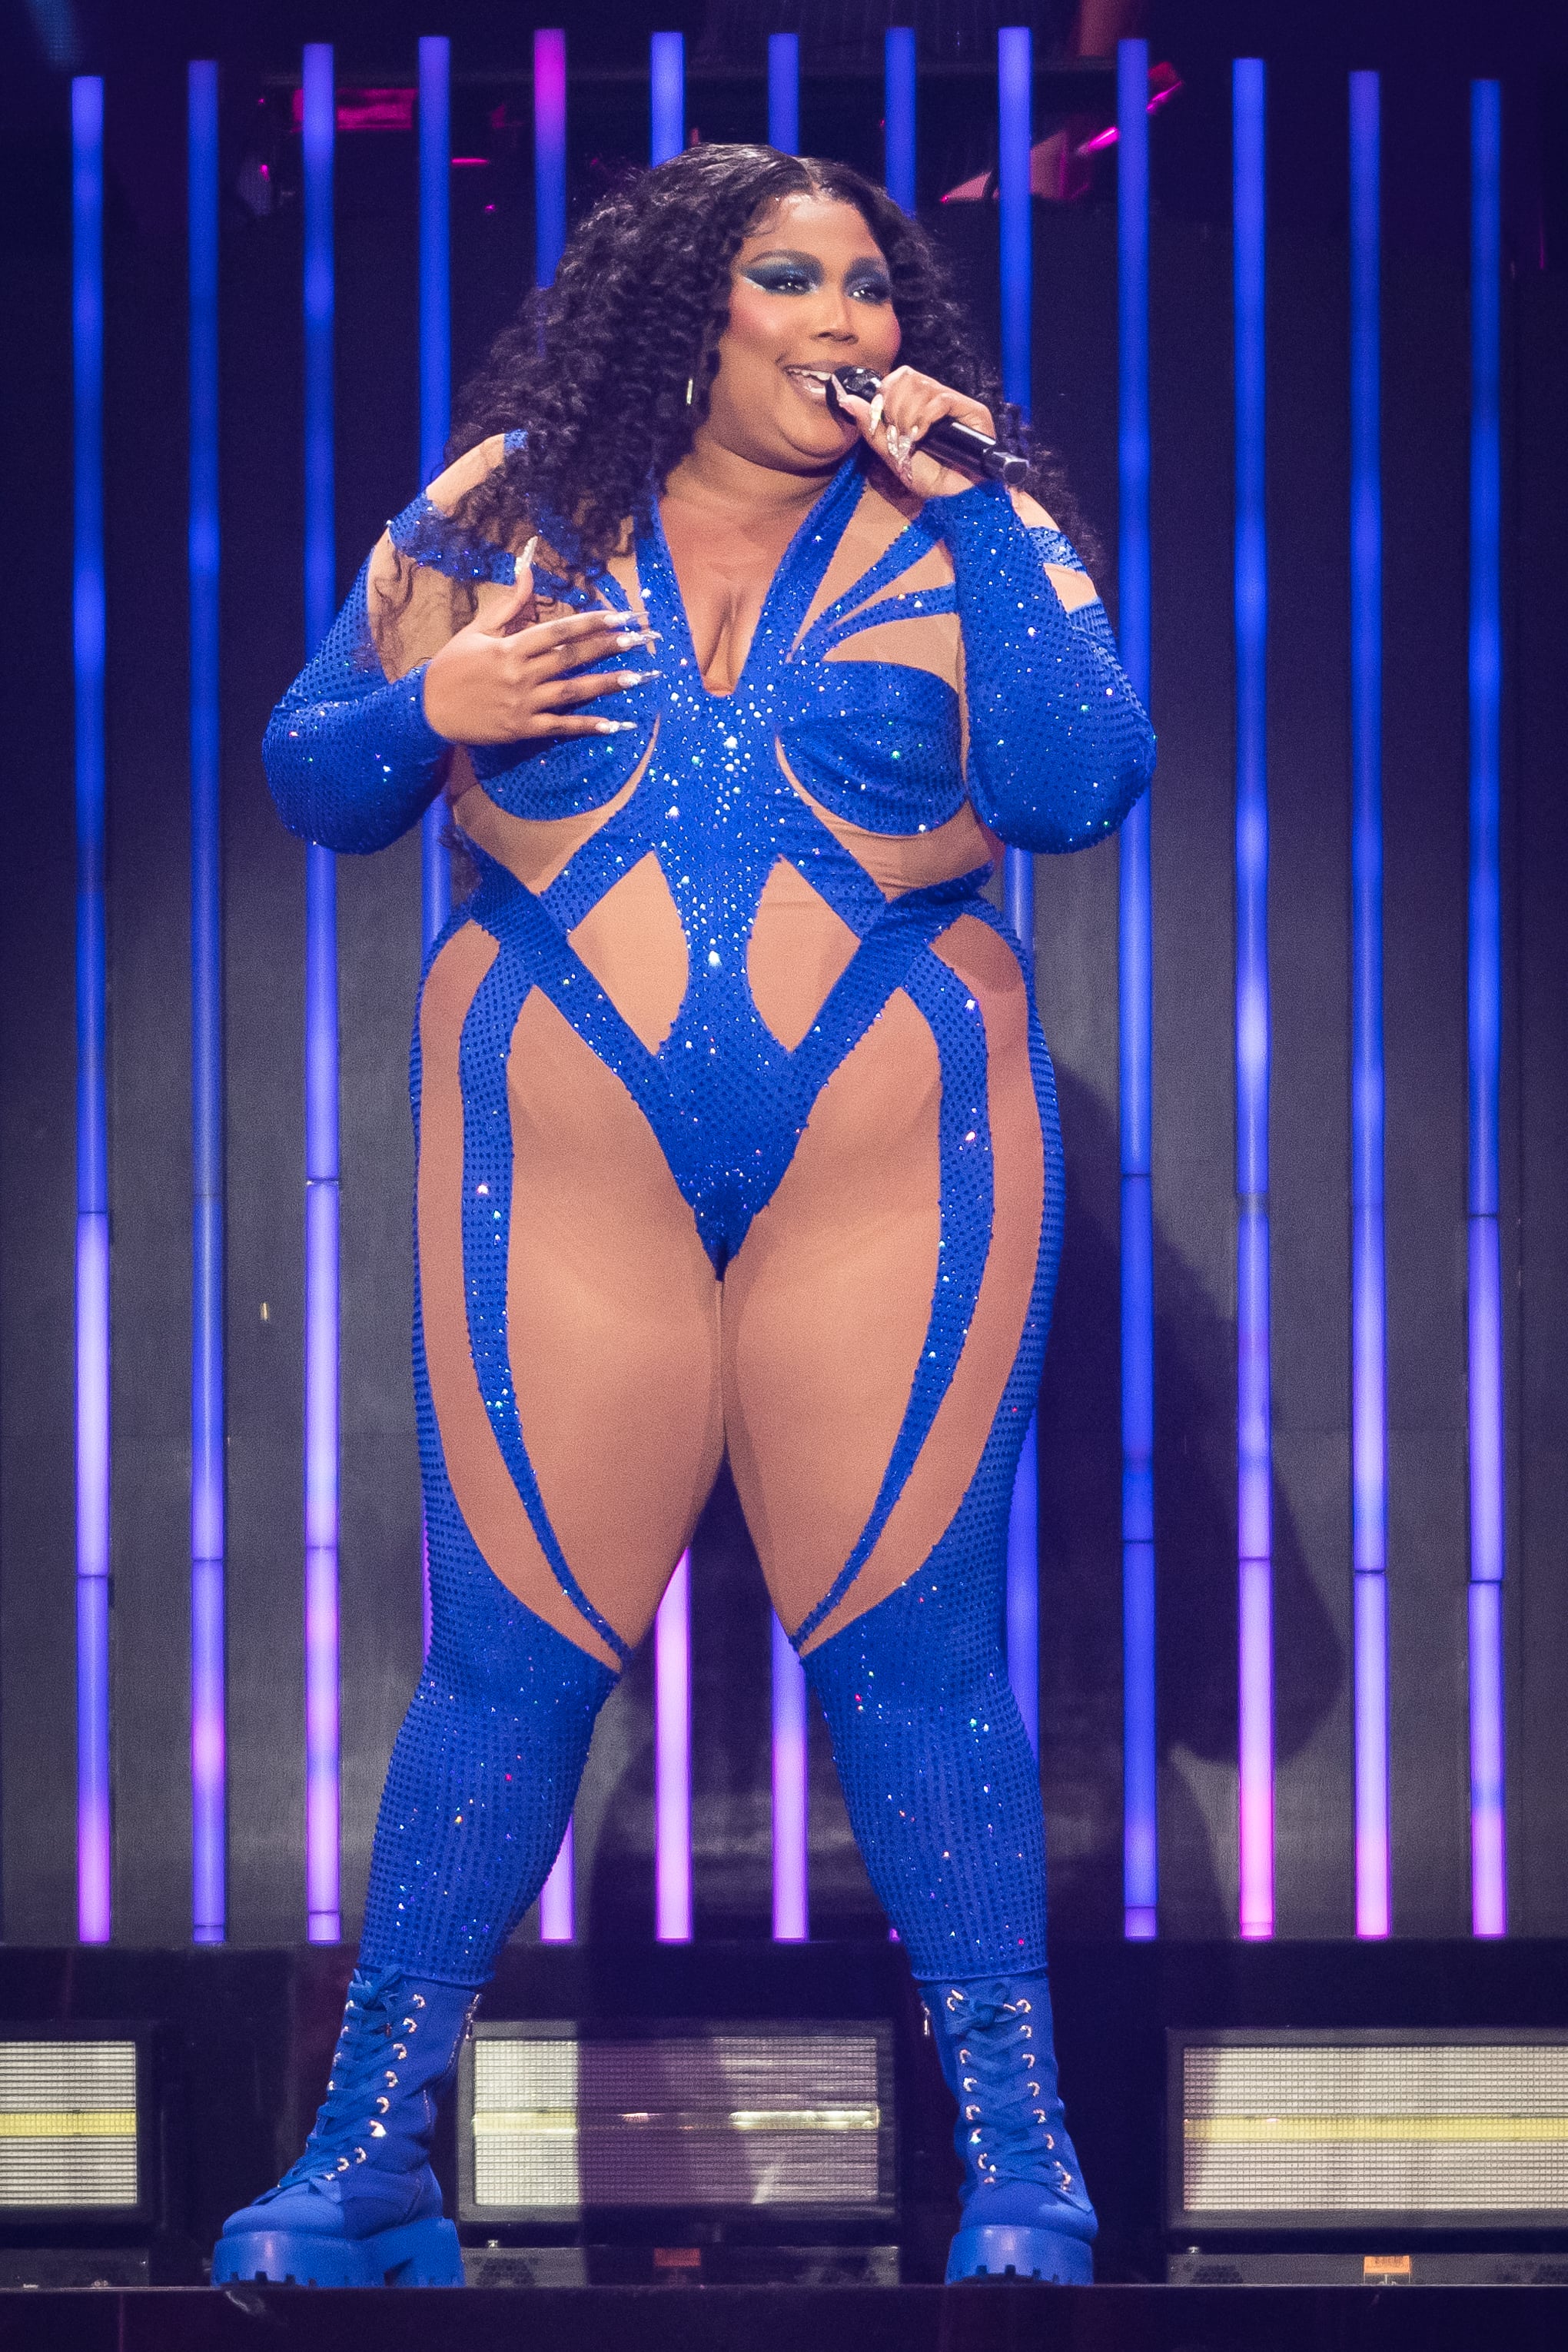 Lizzo stuns in a neon yellow nude illusion bodysuit on stage